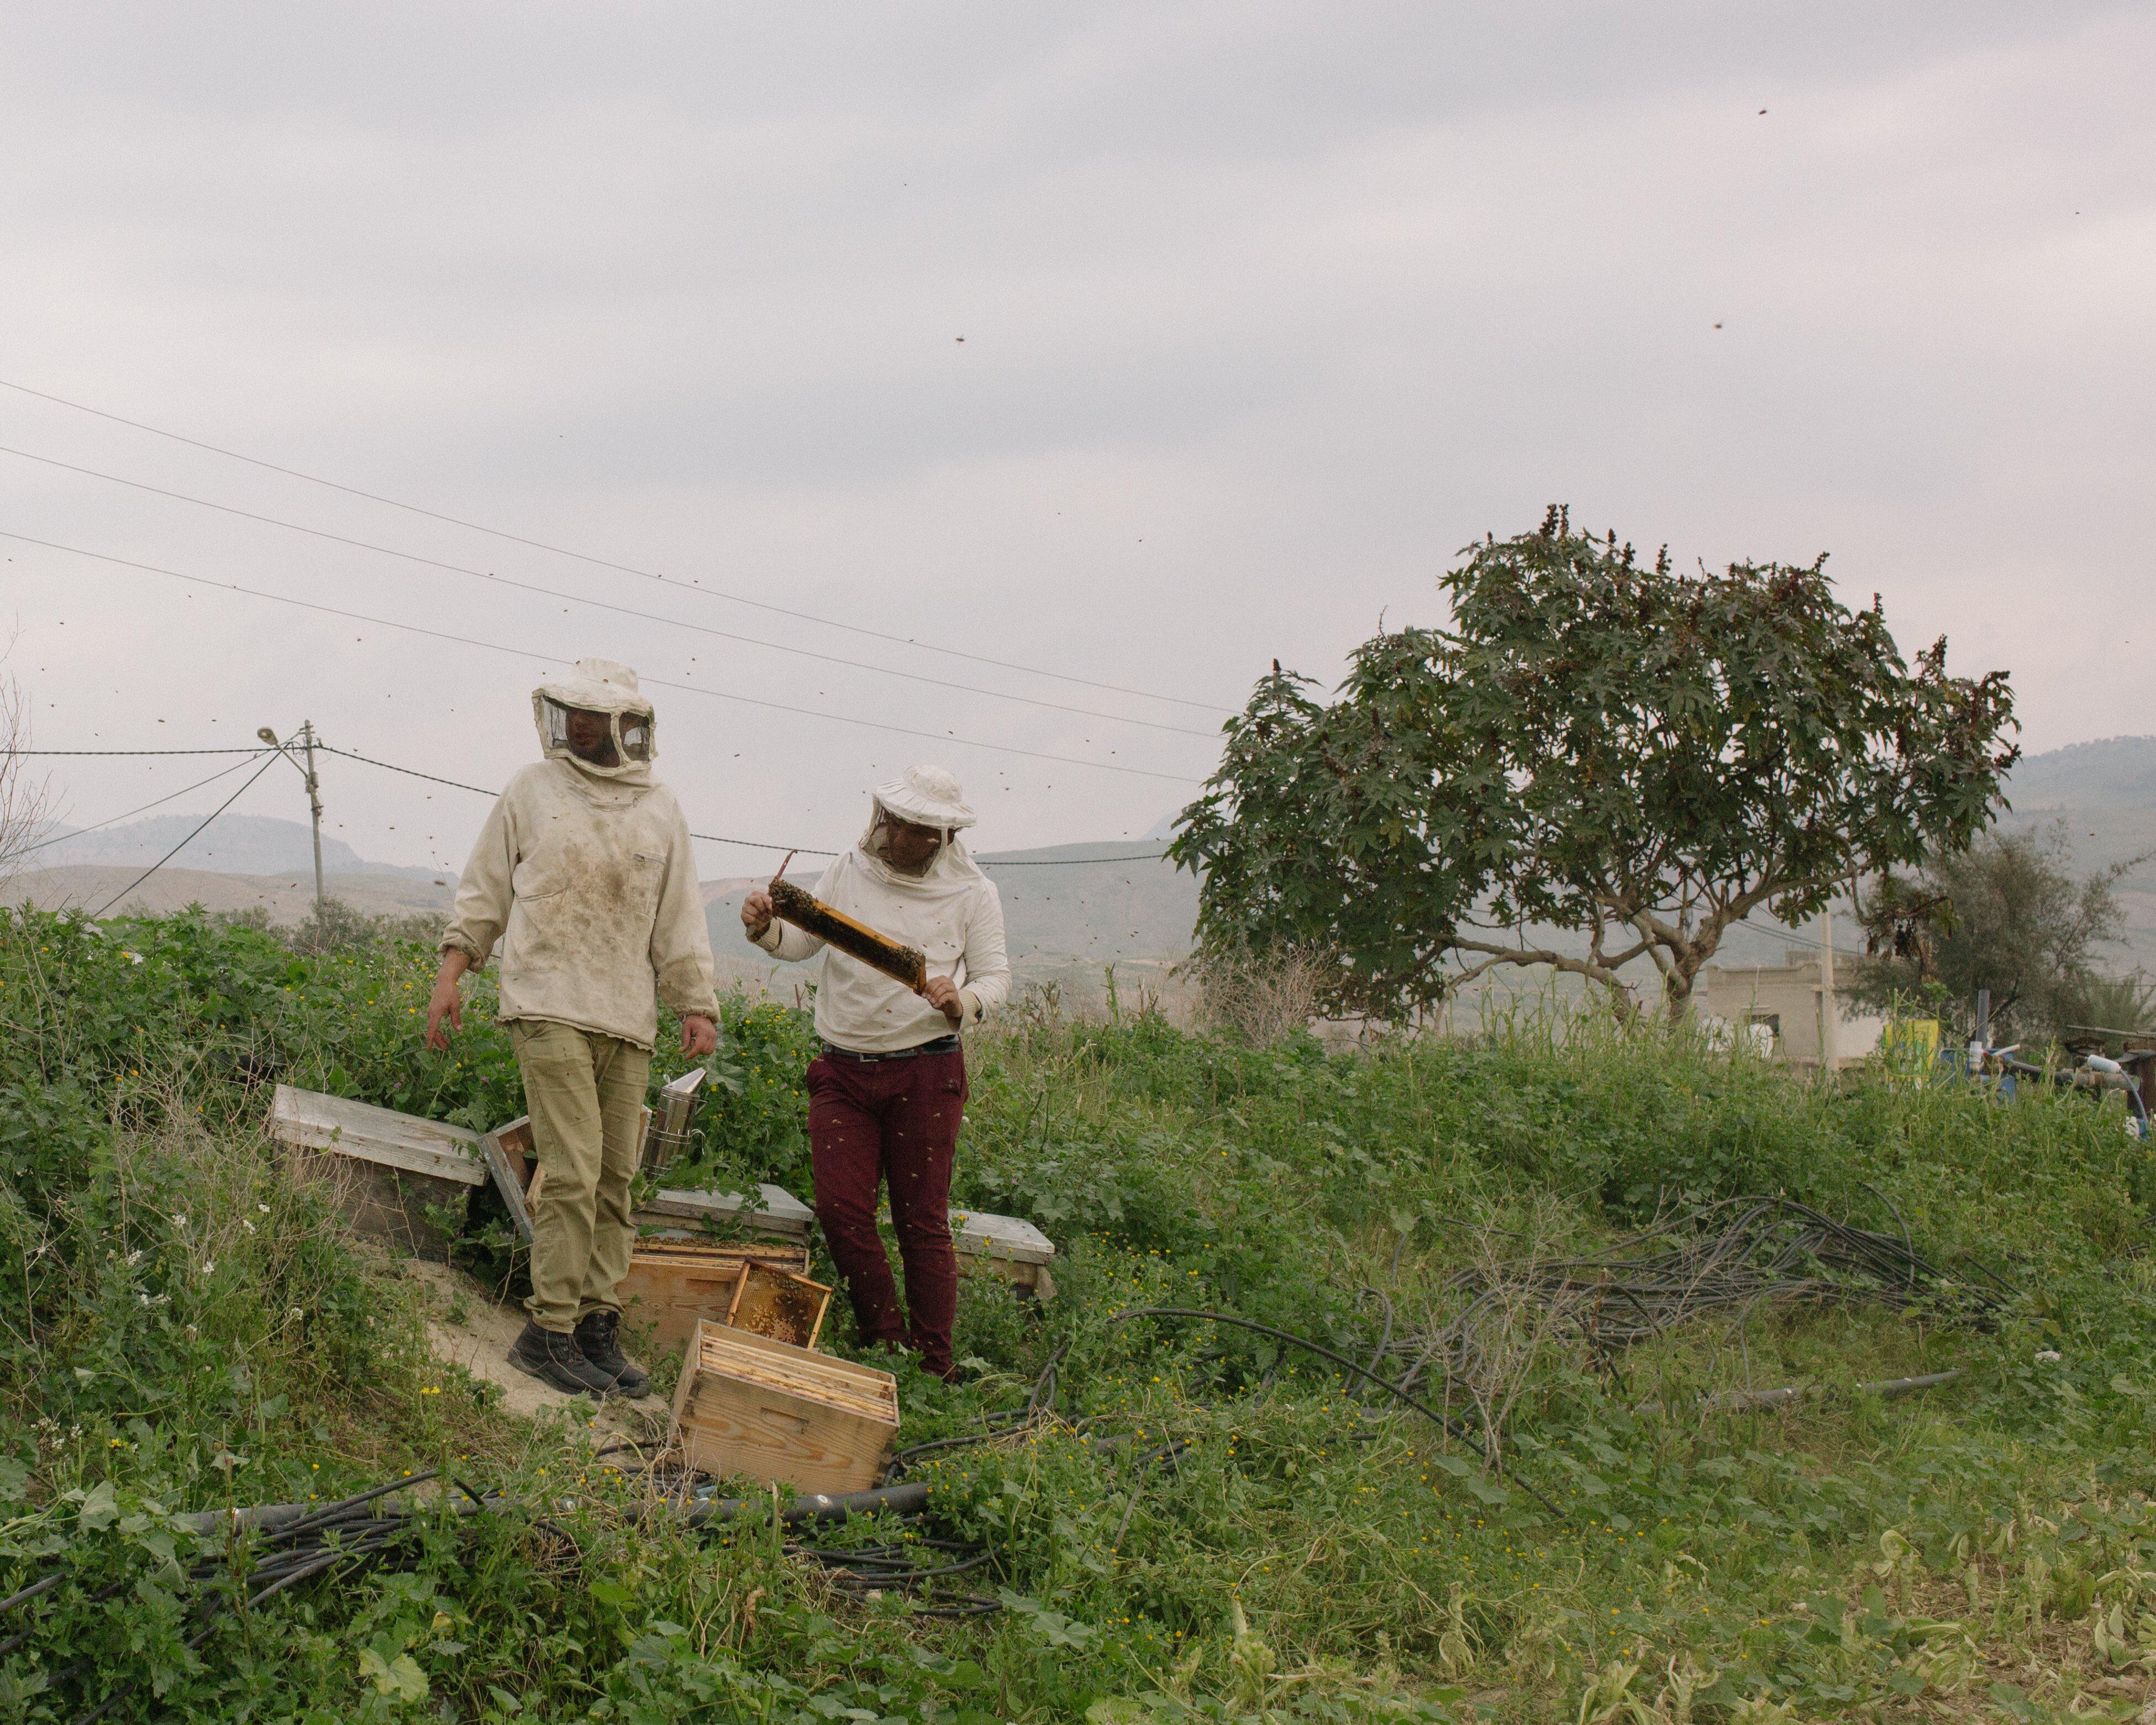 Hudaifah and his friend at their apiary in Jordan Valley near Amman caring for their bees